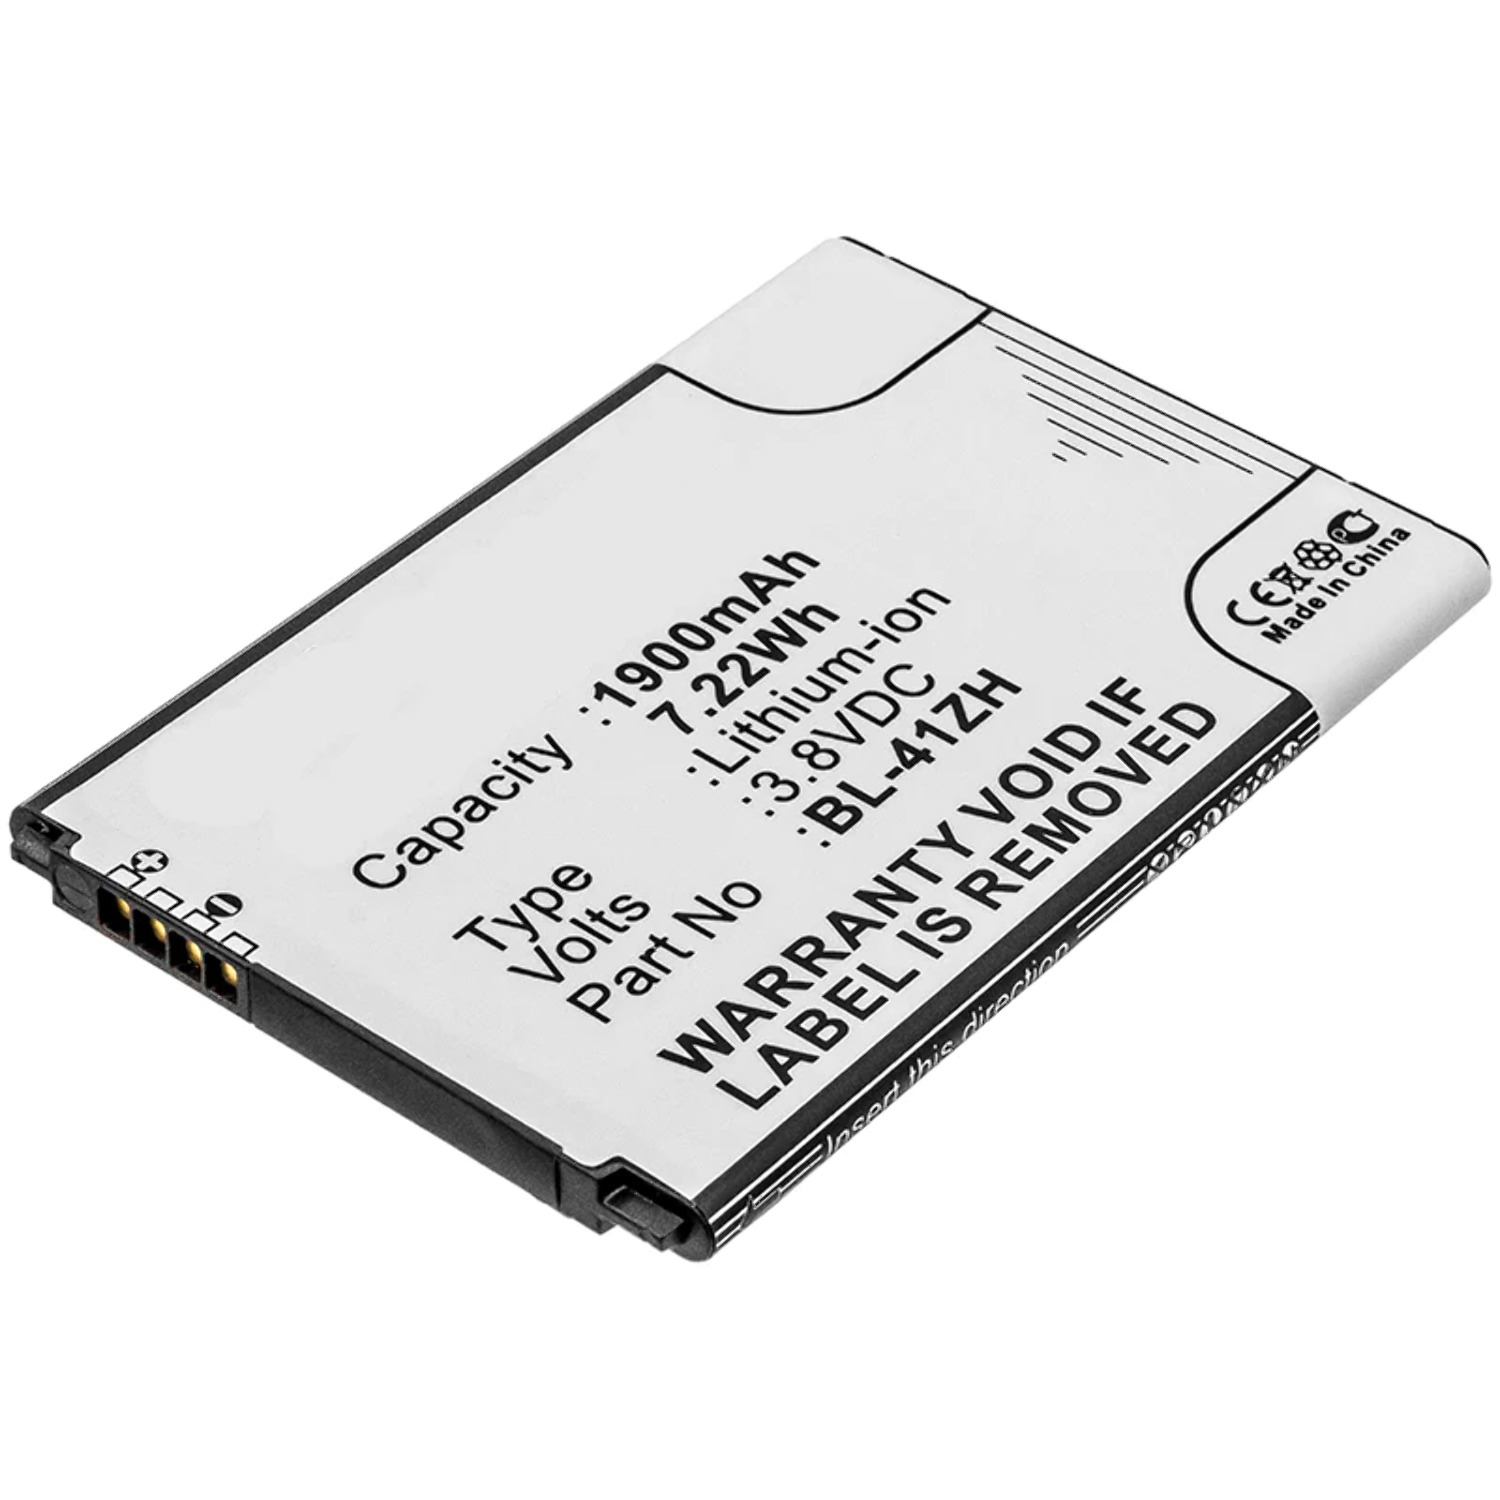 Batteries N Accessories BNA-WB-L3853 Cell Phone Battery - Li-ion, 3.8, 1900mAh, Ultra High Capacity Battery - Replacement for LG BL-41ZH, BL-41ZHB, EAC62378407 Battery - image 2 of 2